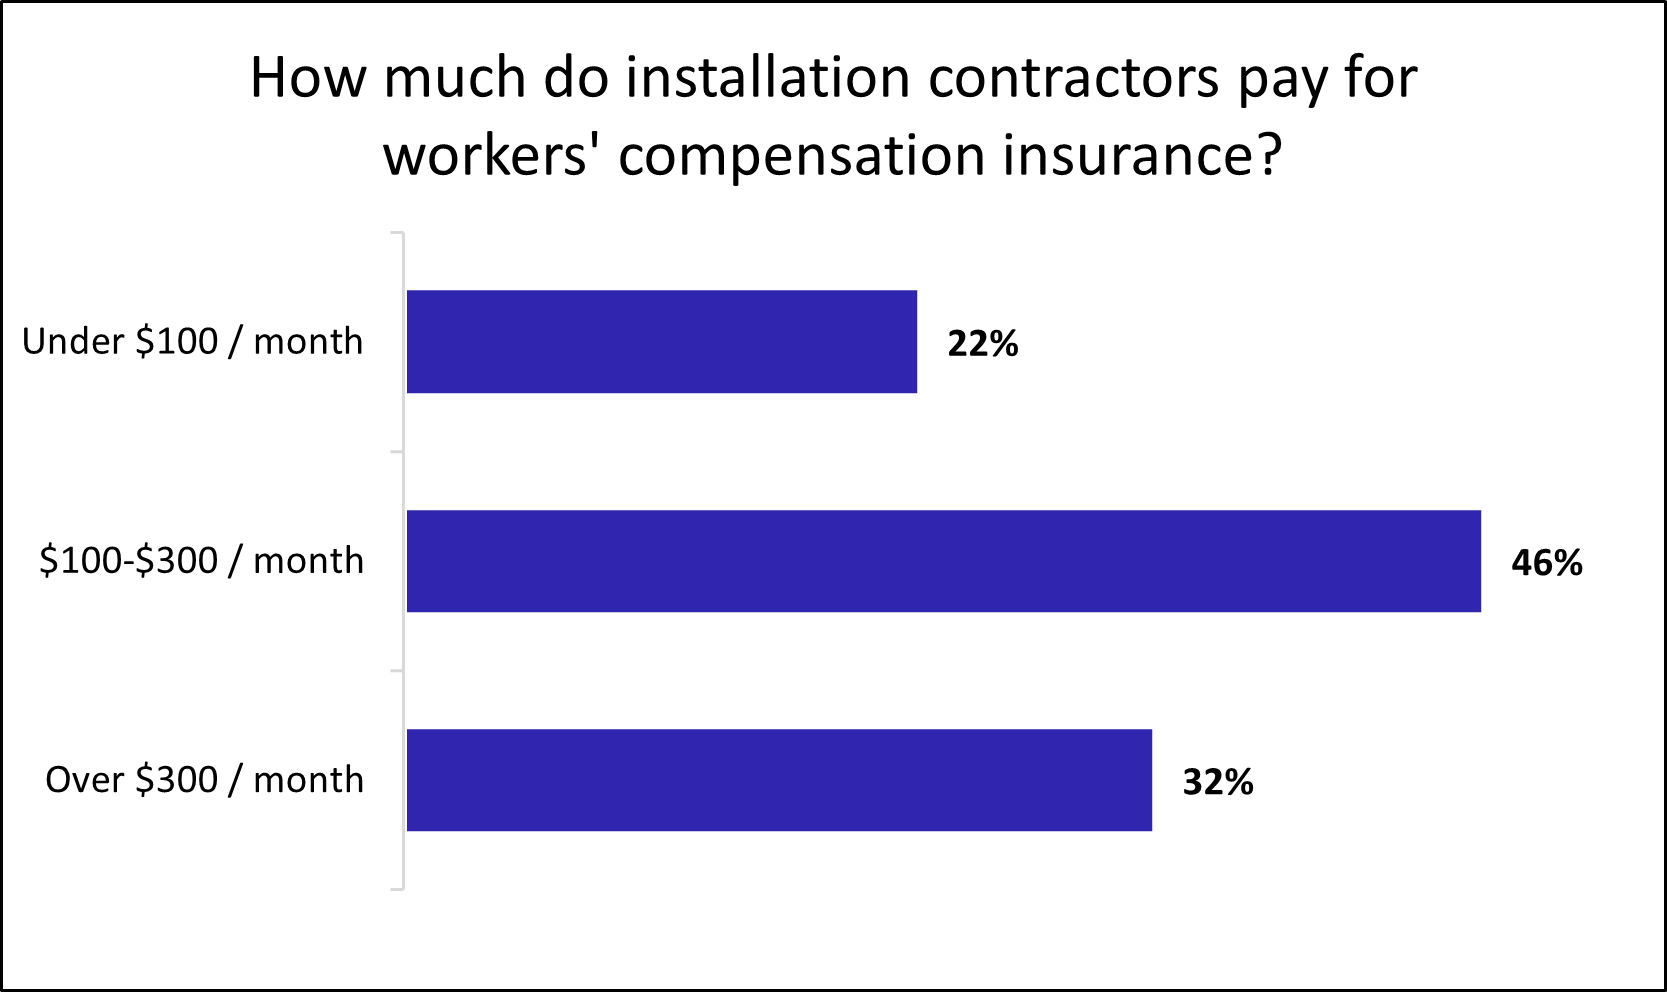 Average monthly cost of workers' compensation insurance for installation businesses.